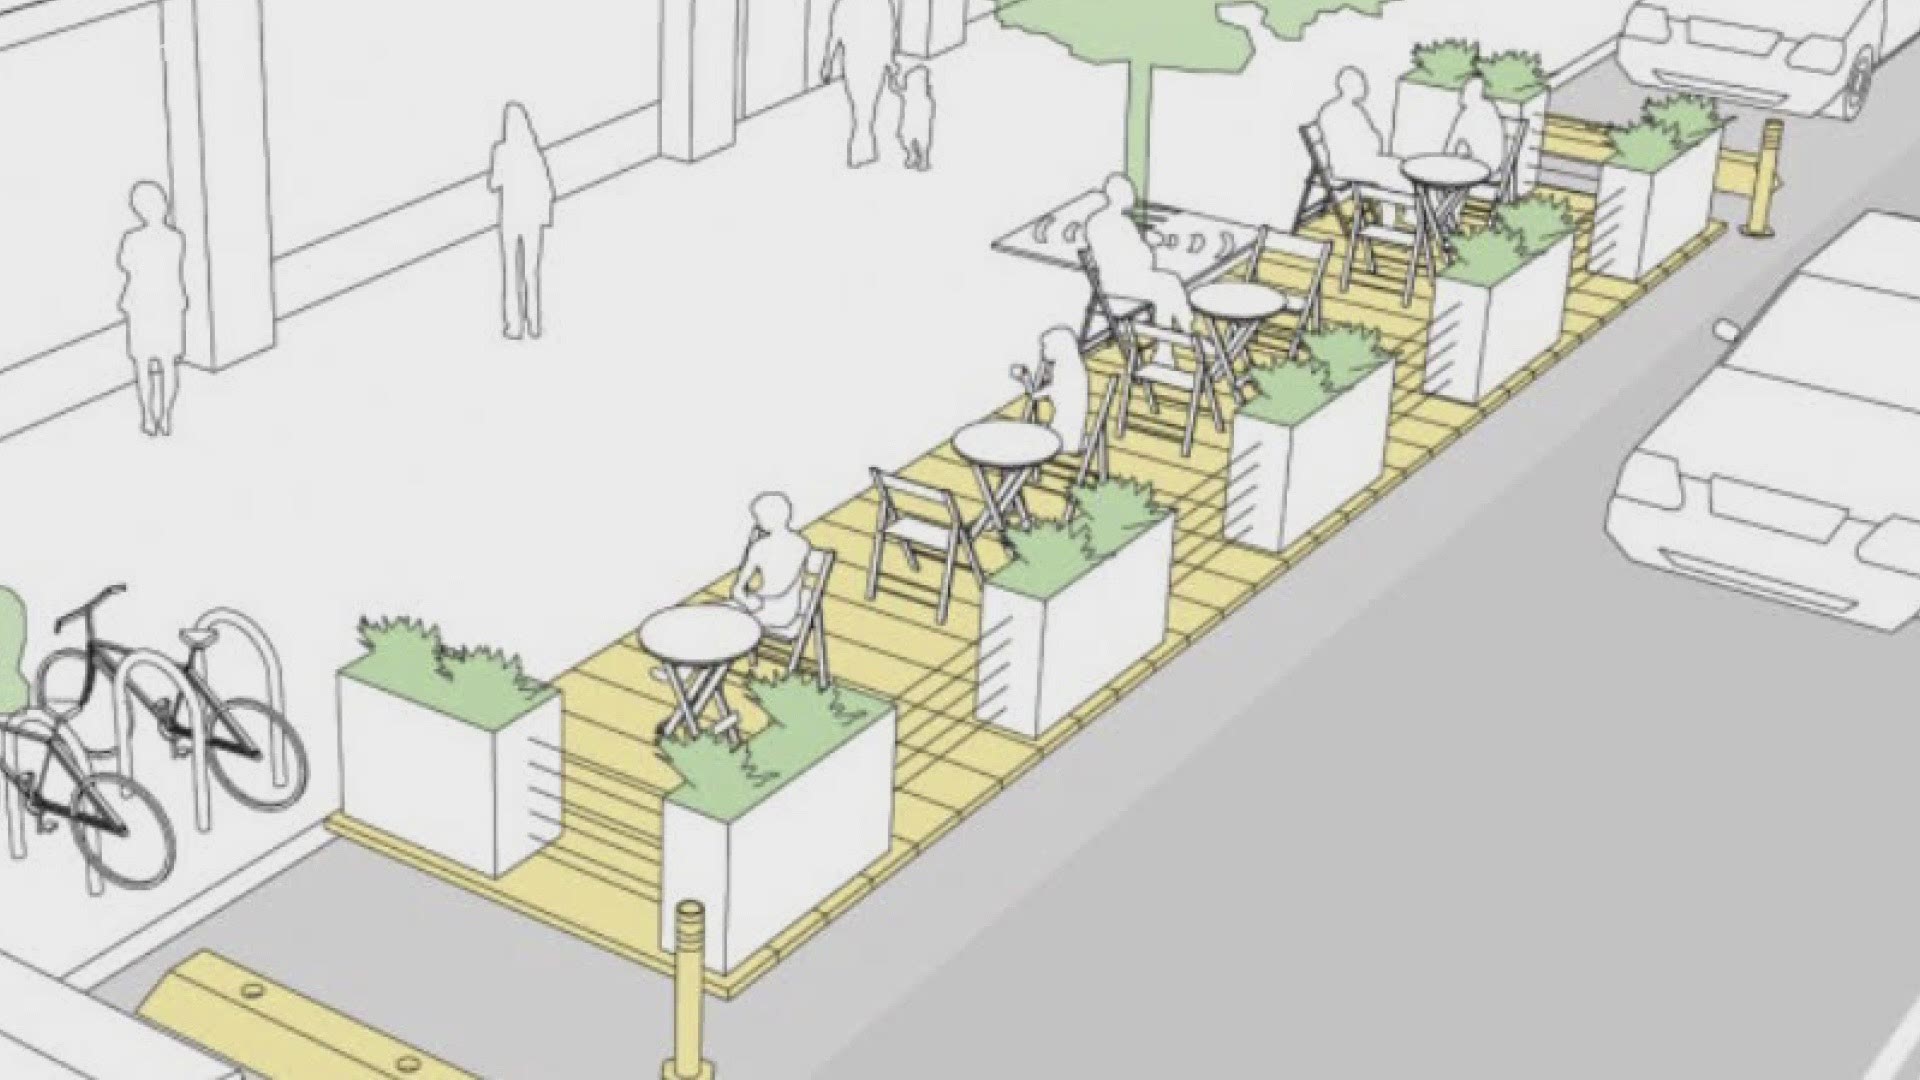 Businesses in Bowling Green could be getting some help when it comes to creating an outdoor space for dining.